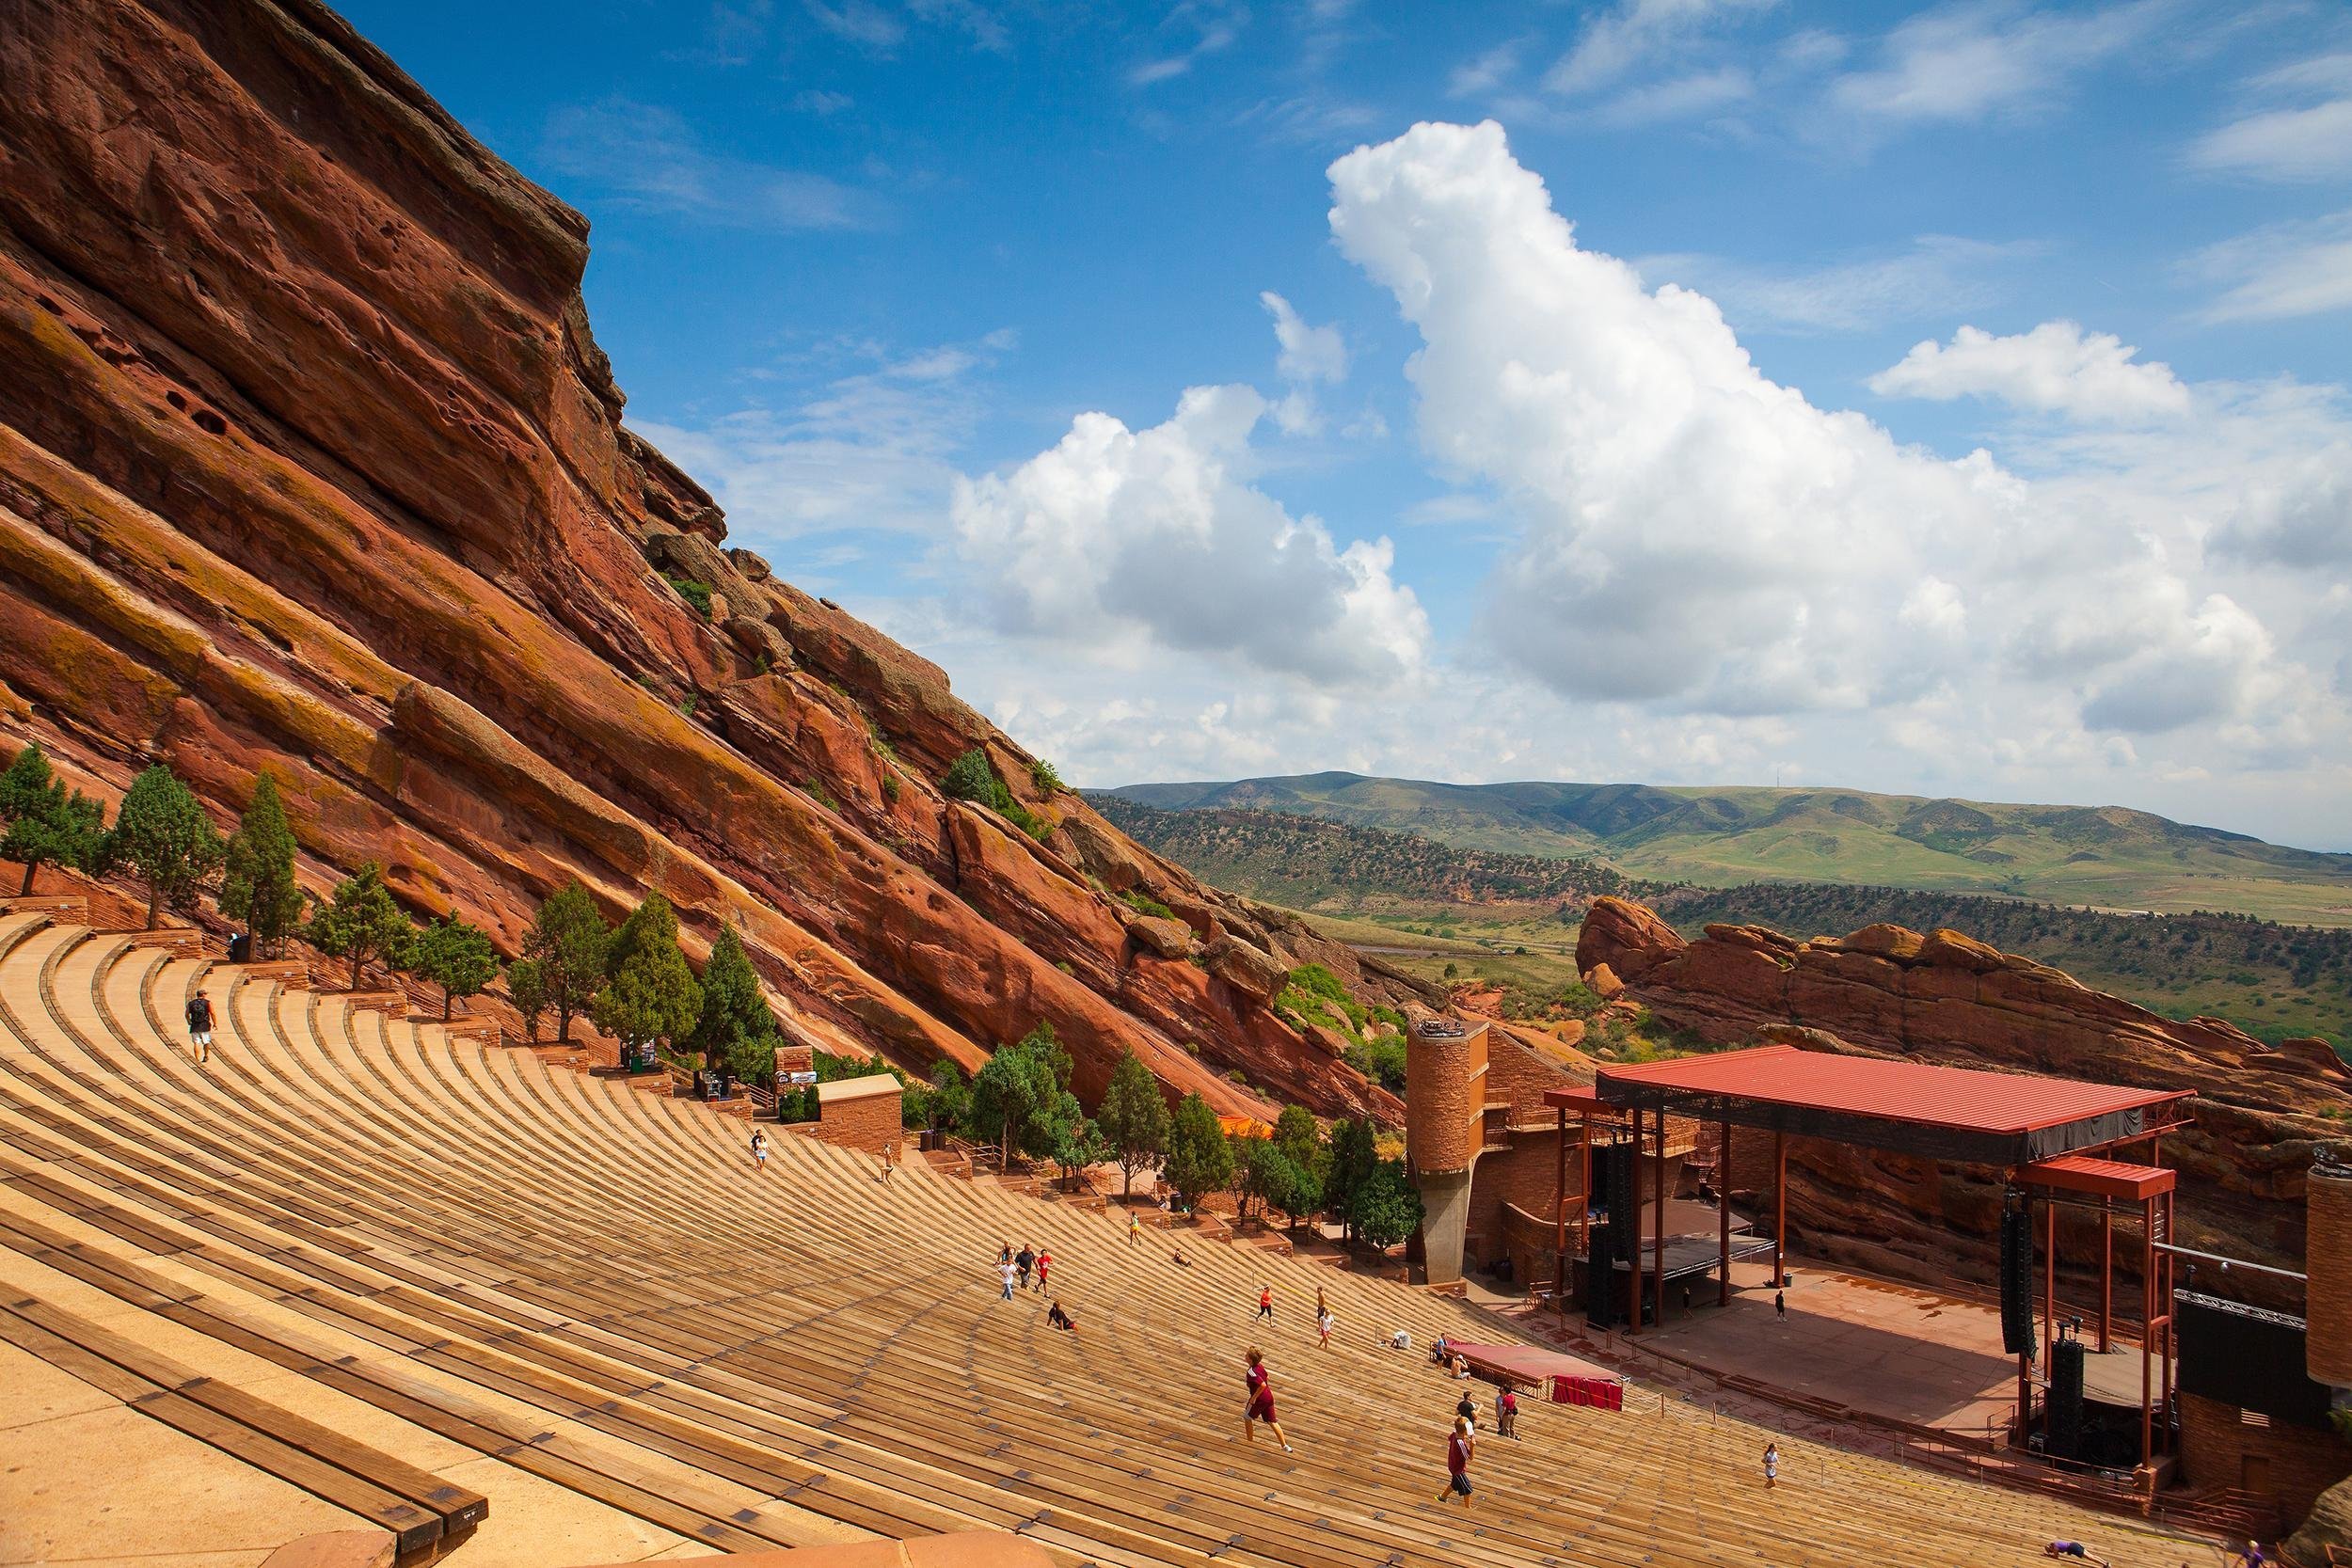 <p>Colorado is a scenic state with thriving urban areas as well as fantastic recreation areas, mountains, and wilderness. Concertgoers love Red Rocks, an outdoor amphitheater carved into the foothills just outside Denver. It's a dramatic venue for a selfie, even when there is no band performing. </p>